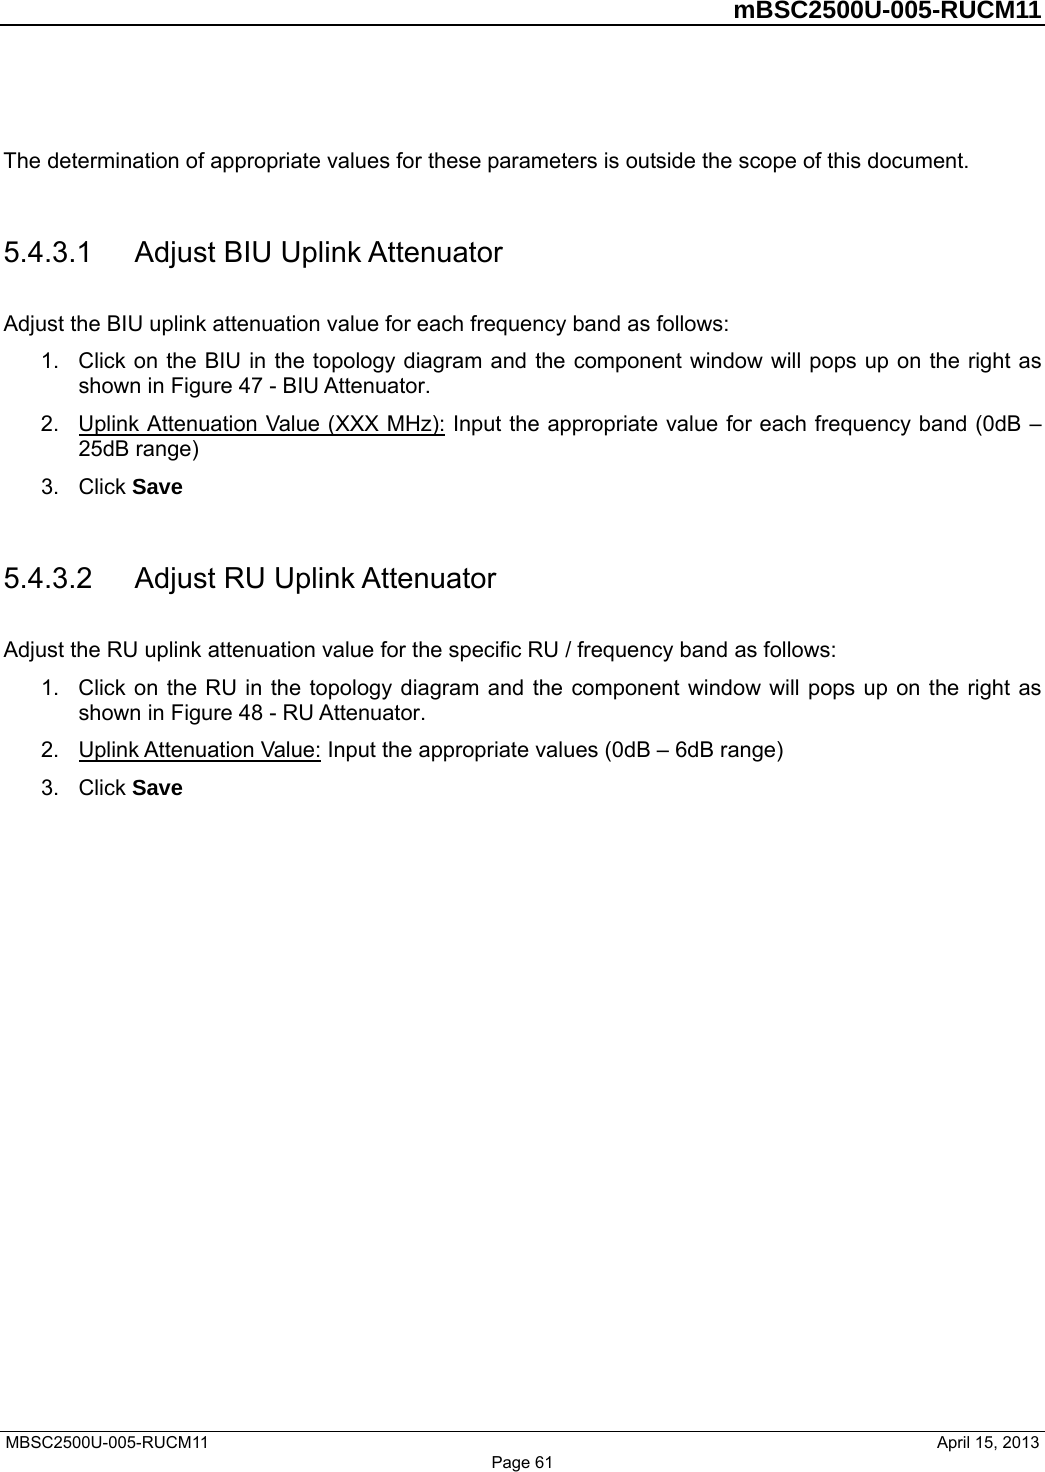         mBSC2500U-005-RUCM11   MBSC2500U-005-RUCM11                                April 15, 2013 Page 61  The determination of appropriate values for these parameters is outside the scope of this document.    5.4.3.1  Adjust BIU Uplink Attenuator Adjust the BIU uplink attenuation value for each frequency band as follows: 1.  Click on the BIU in the topology diagram and the component window will pops up on the right as shown in Figure 47 - BIU Attenuator.  2.  Uplink Attenuation Value (XXX MHz): Input the appropriate value for each frequency band (0dB – 25dB range) 3. Click Save  5.4.3.2  Adjust RU Uplink Attenuator Adjust the RU uplink attenuation value for the specific RU / frequency band as follows: 1.  Click on the RU in the topology diagram and the component window will pops up on the right as shown in Figure 48 - RU Attenuator.  2.  Uplink Attenuation Value: Input the appropriate values (0dB – 6dB range) 3. Click Save  